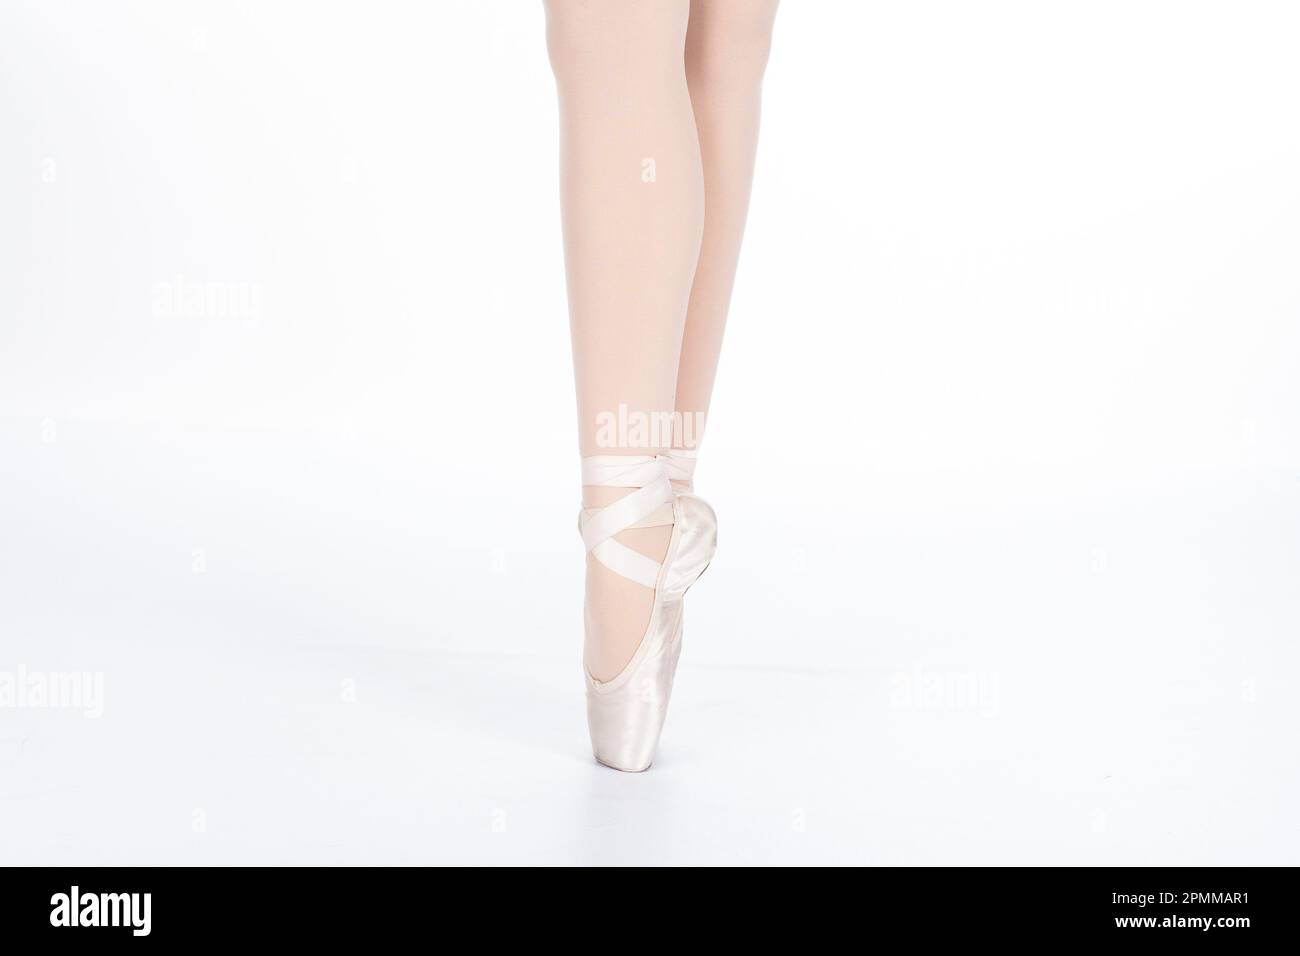 En Pointe CORRECT together closeup Close up of young female ballet dancer showing various classic ballet feet positions for classical ballet or dance Stock Photo